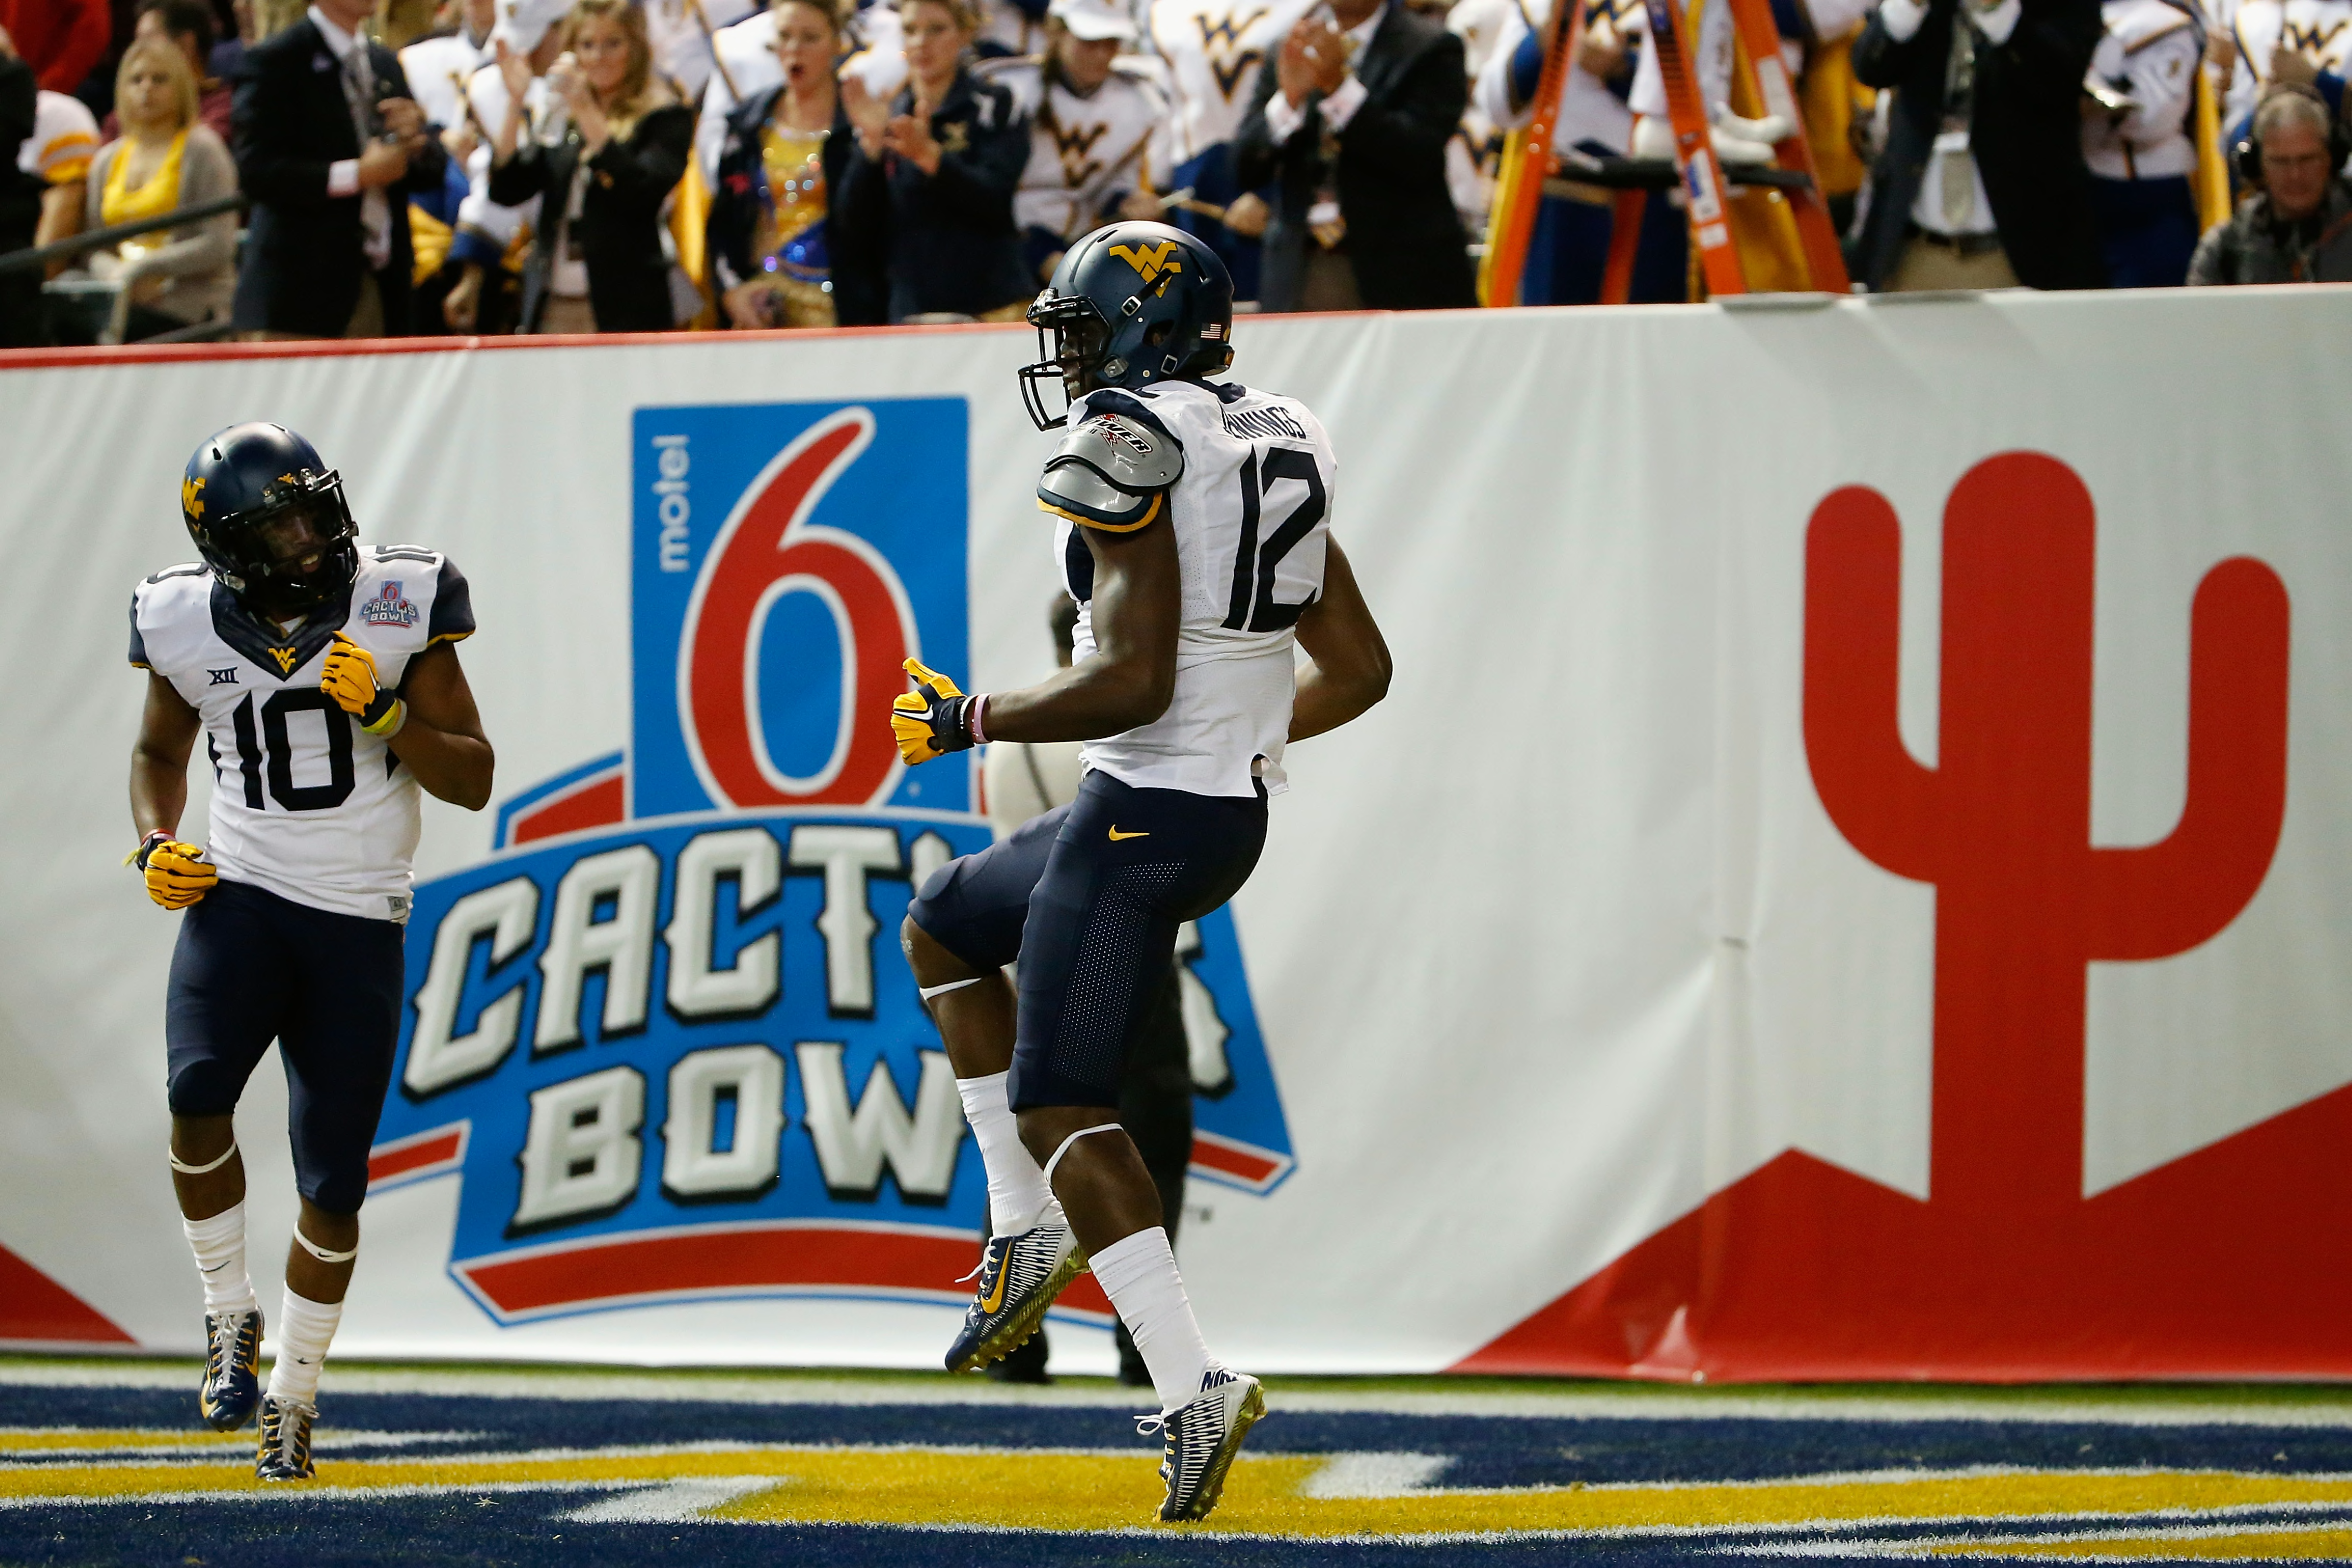 West Virginia Football 3 bowl game possibilities for Mountaineers Page 3